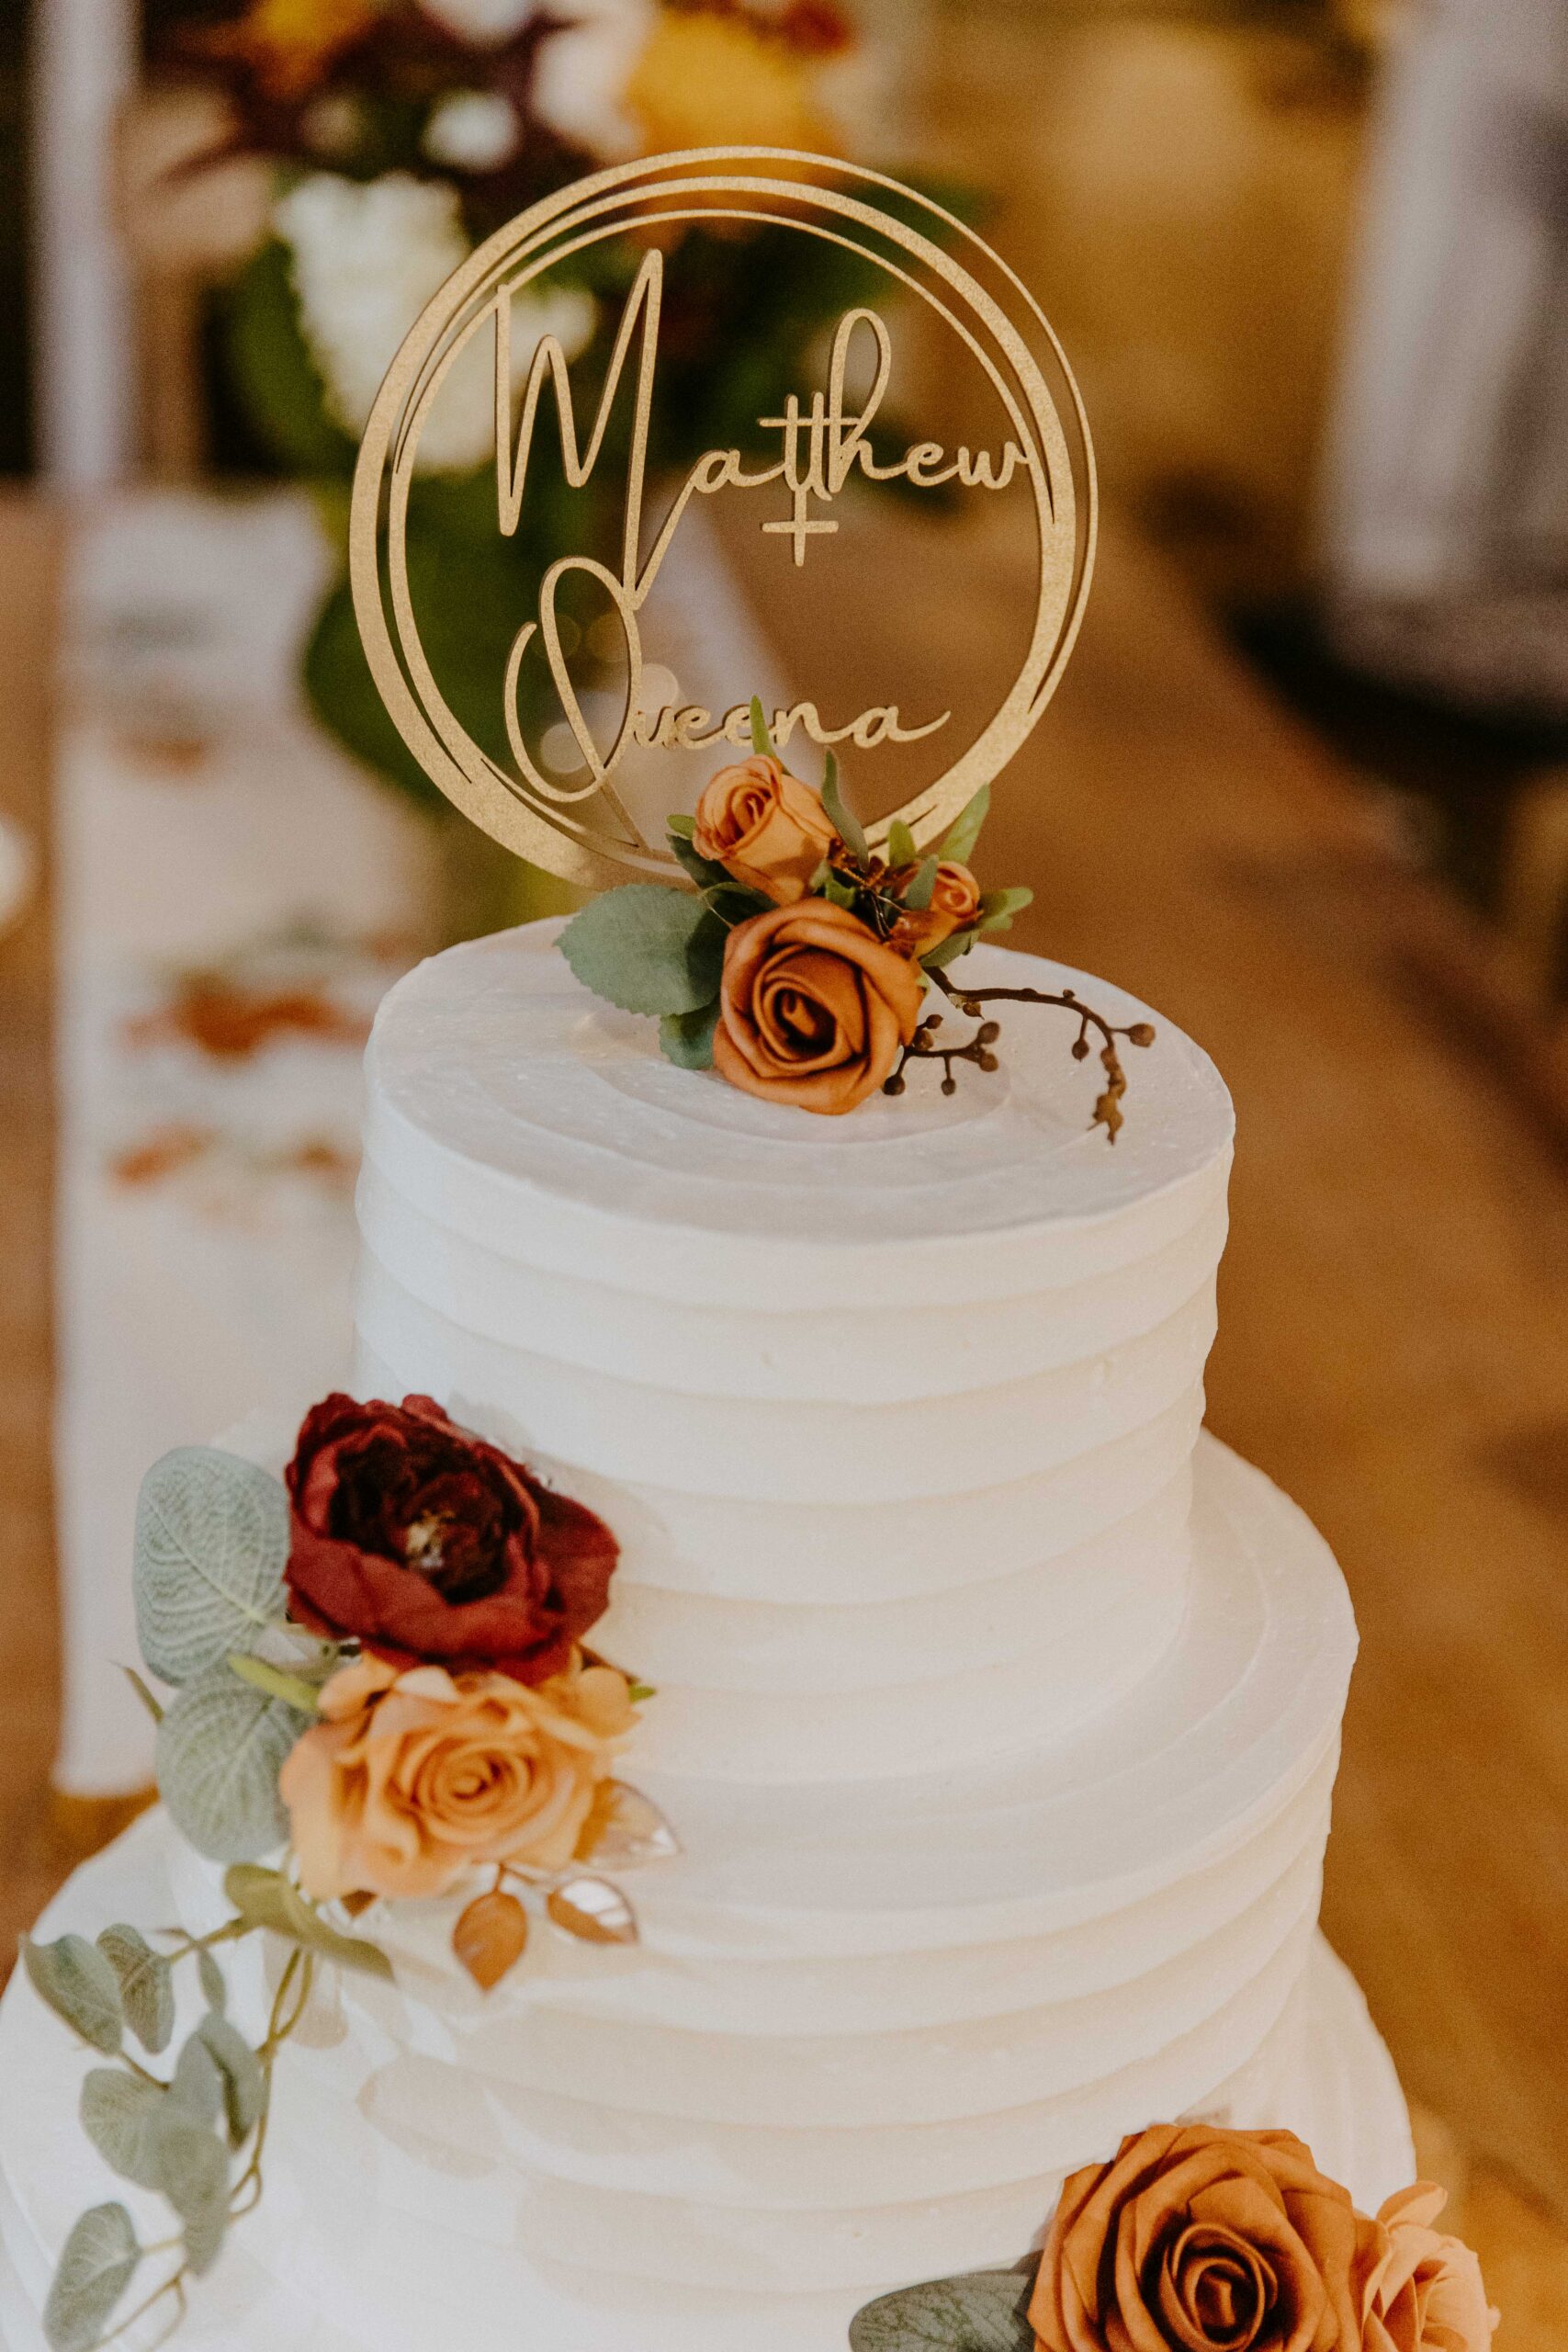 Elegant three-tiered wedding cake adorned with roses and a custom name topper.